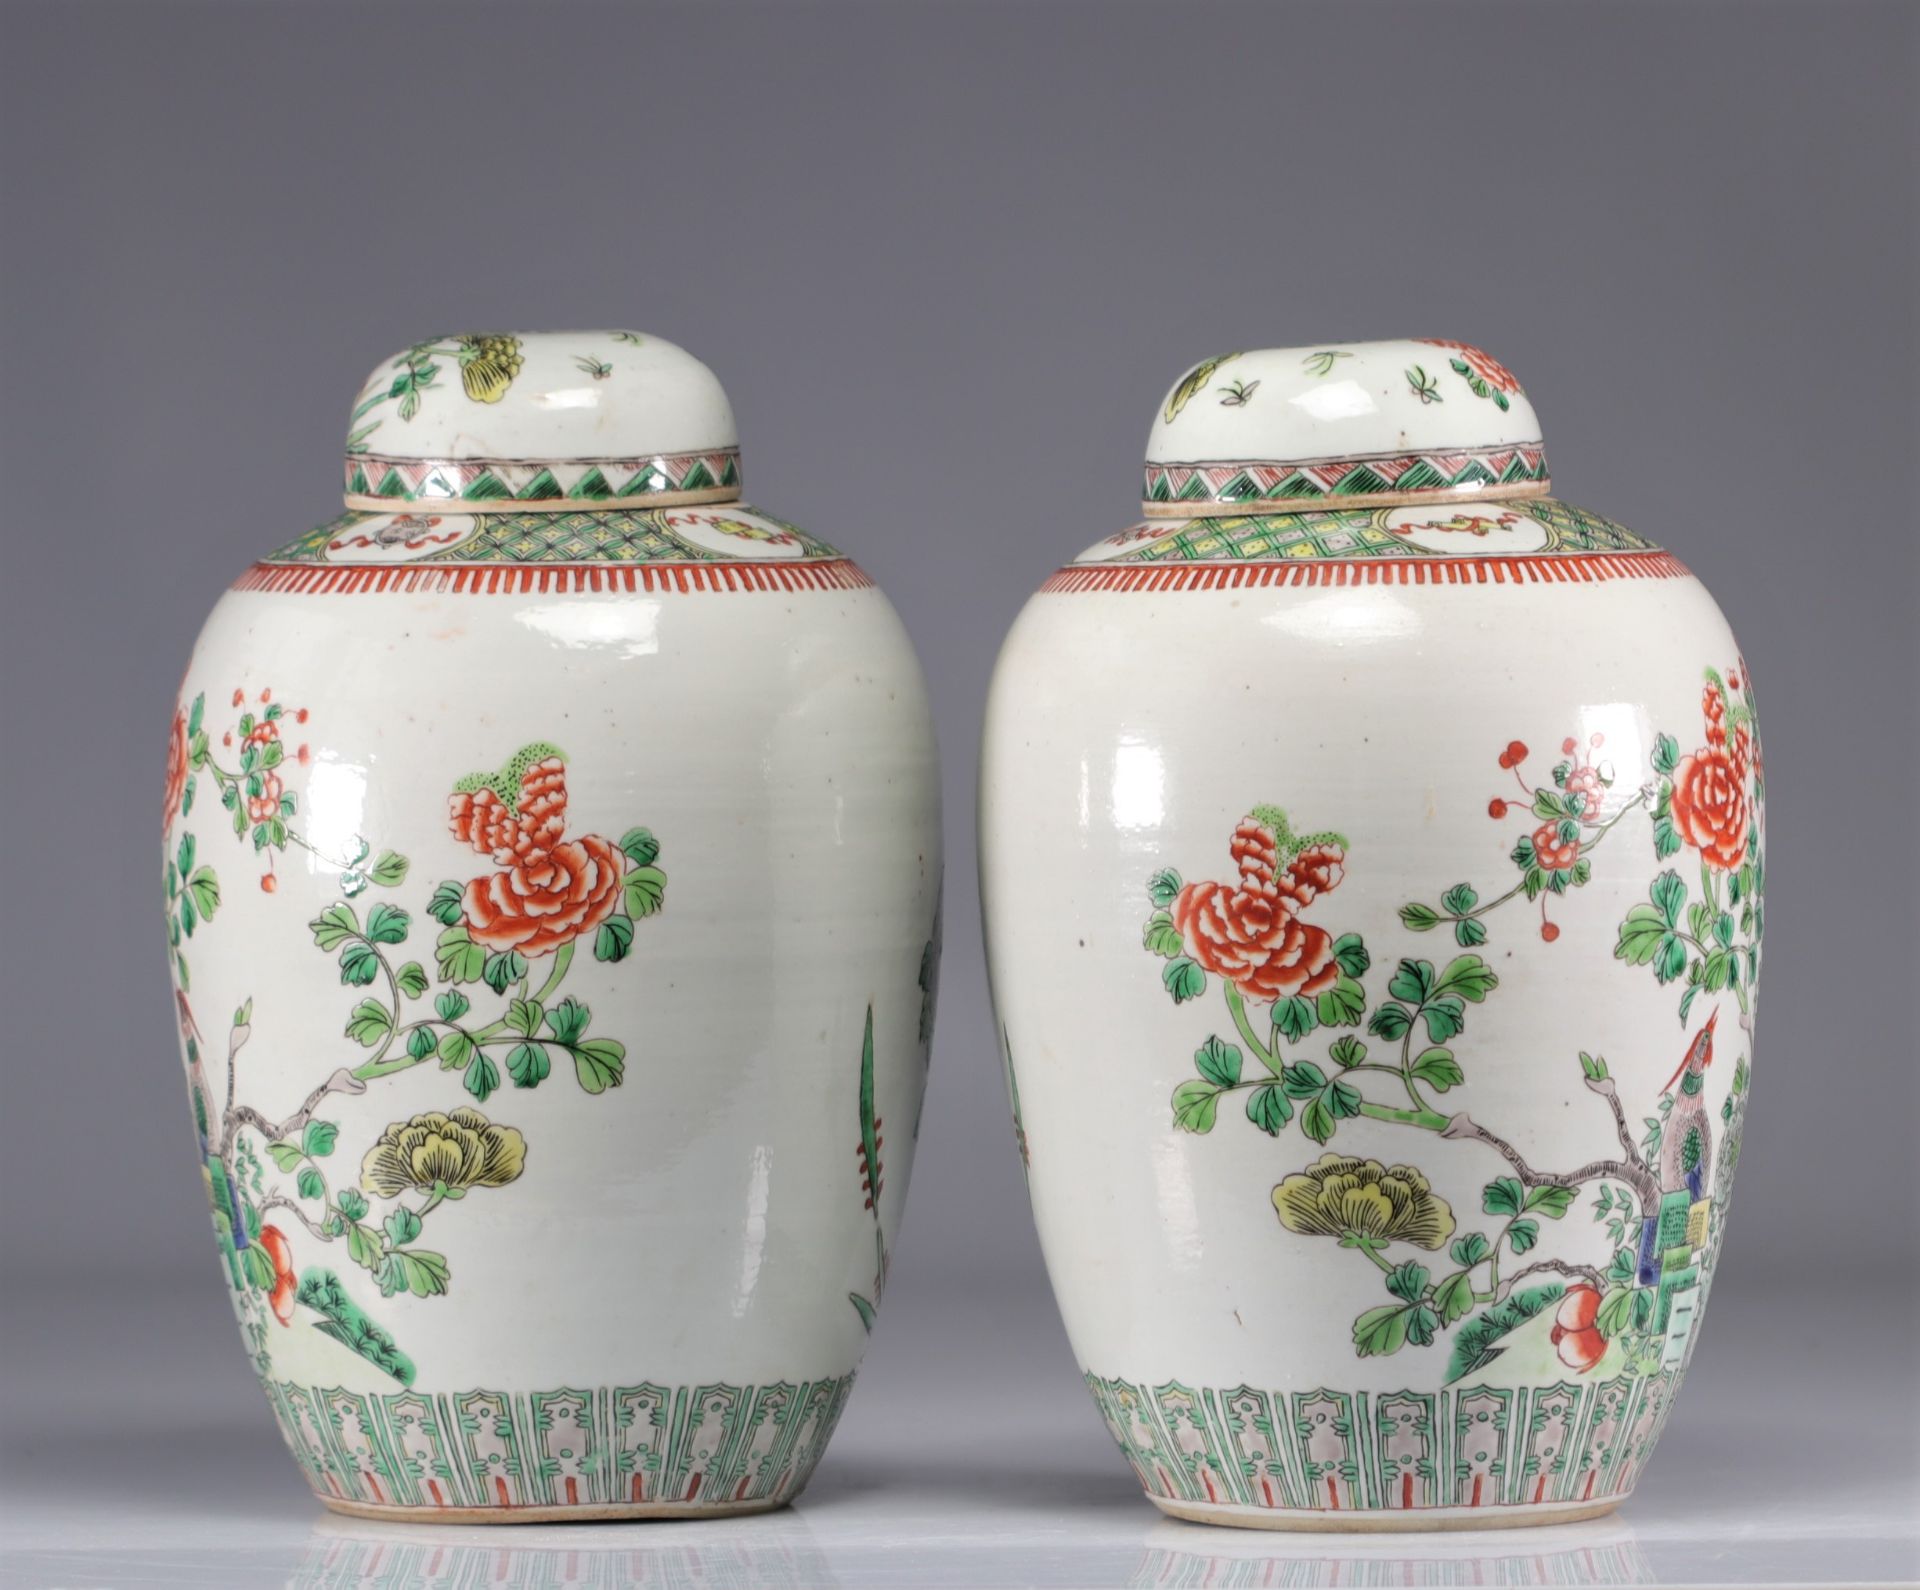 (2) Pair of vases covered with Famille verte and decorated with birds from 19th century - Image 3 of 4